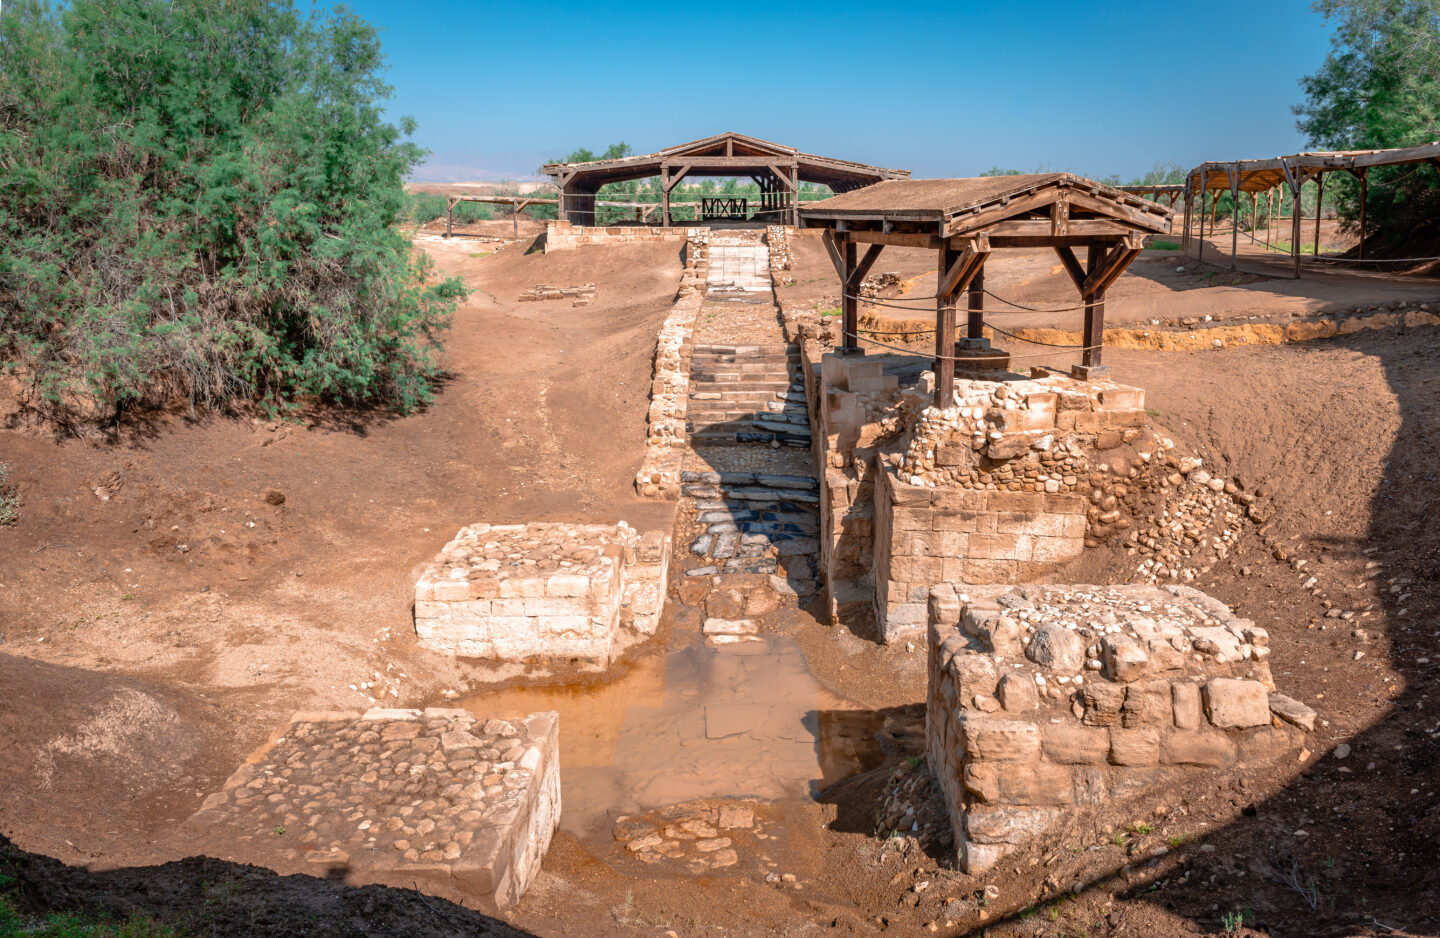 Jordan Road Trip: his is considered to be the location of the Baptism of Jesus Christ by John the Baptist, on the east bank of the Jordan River, in Jordan.